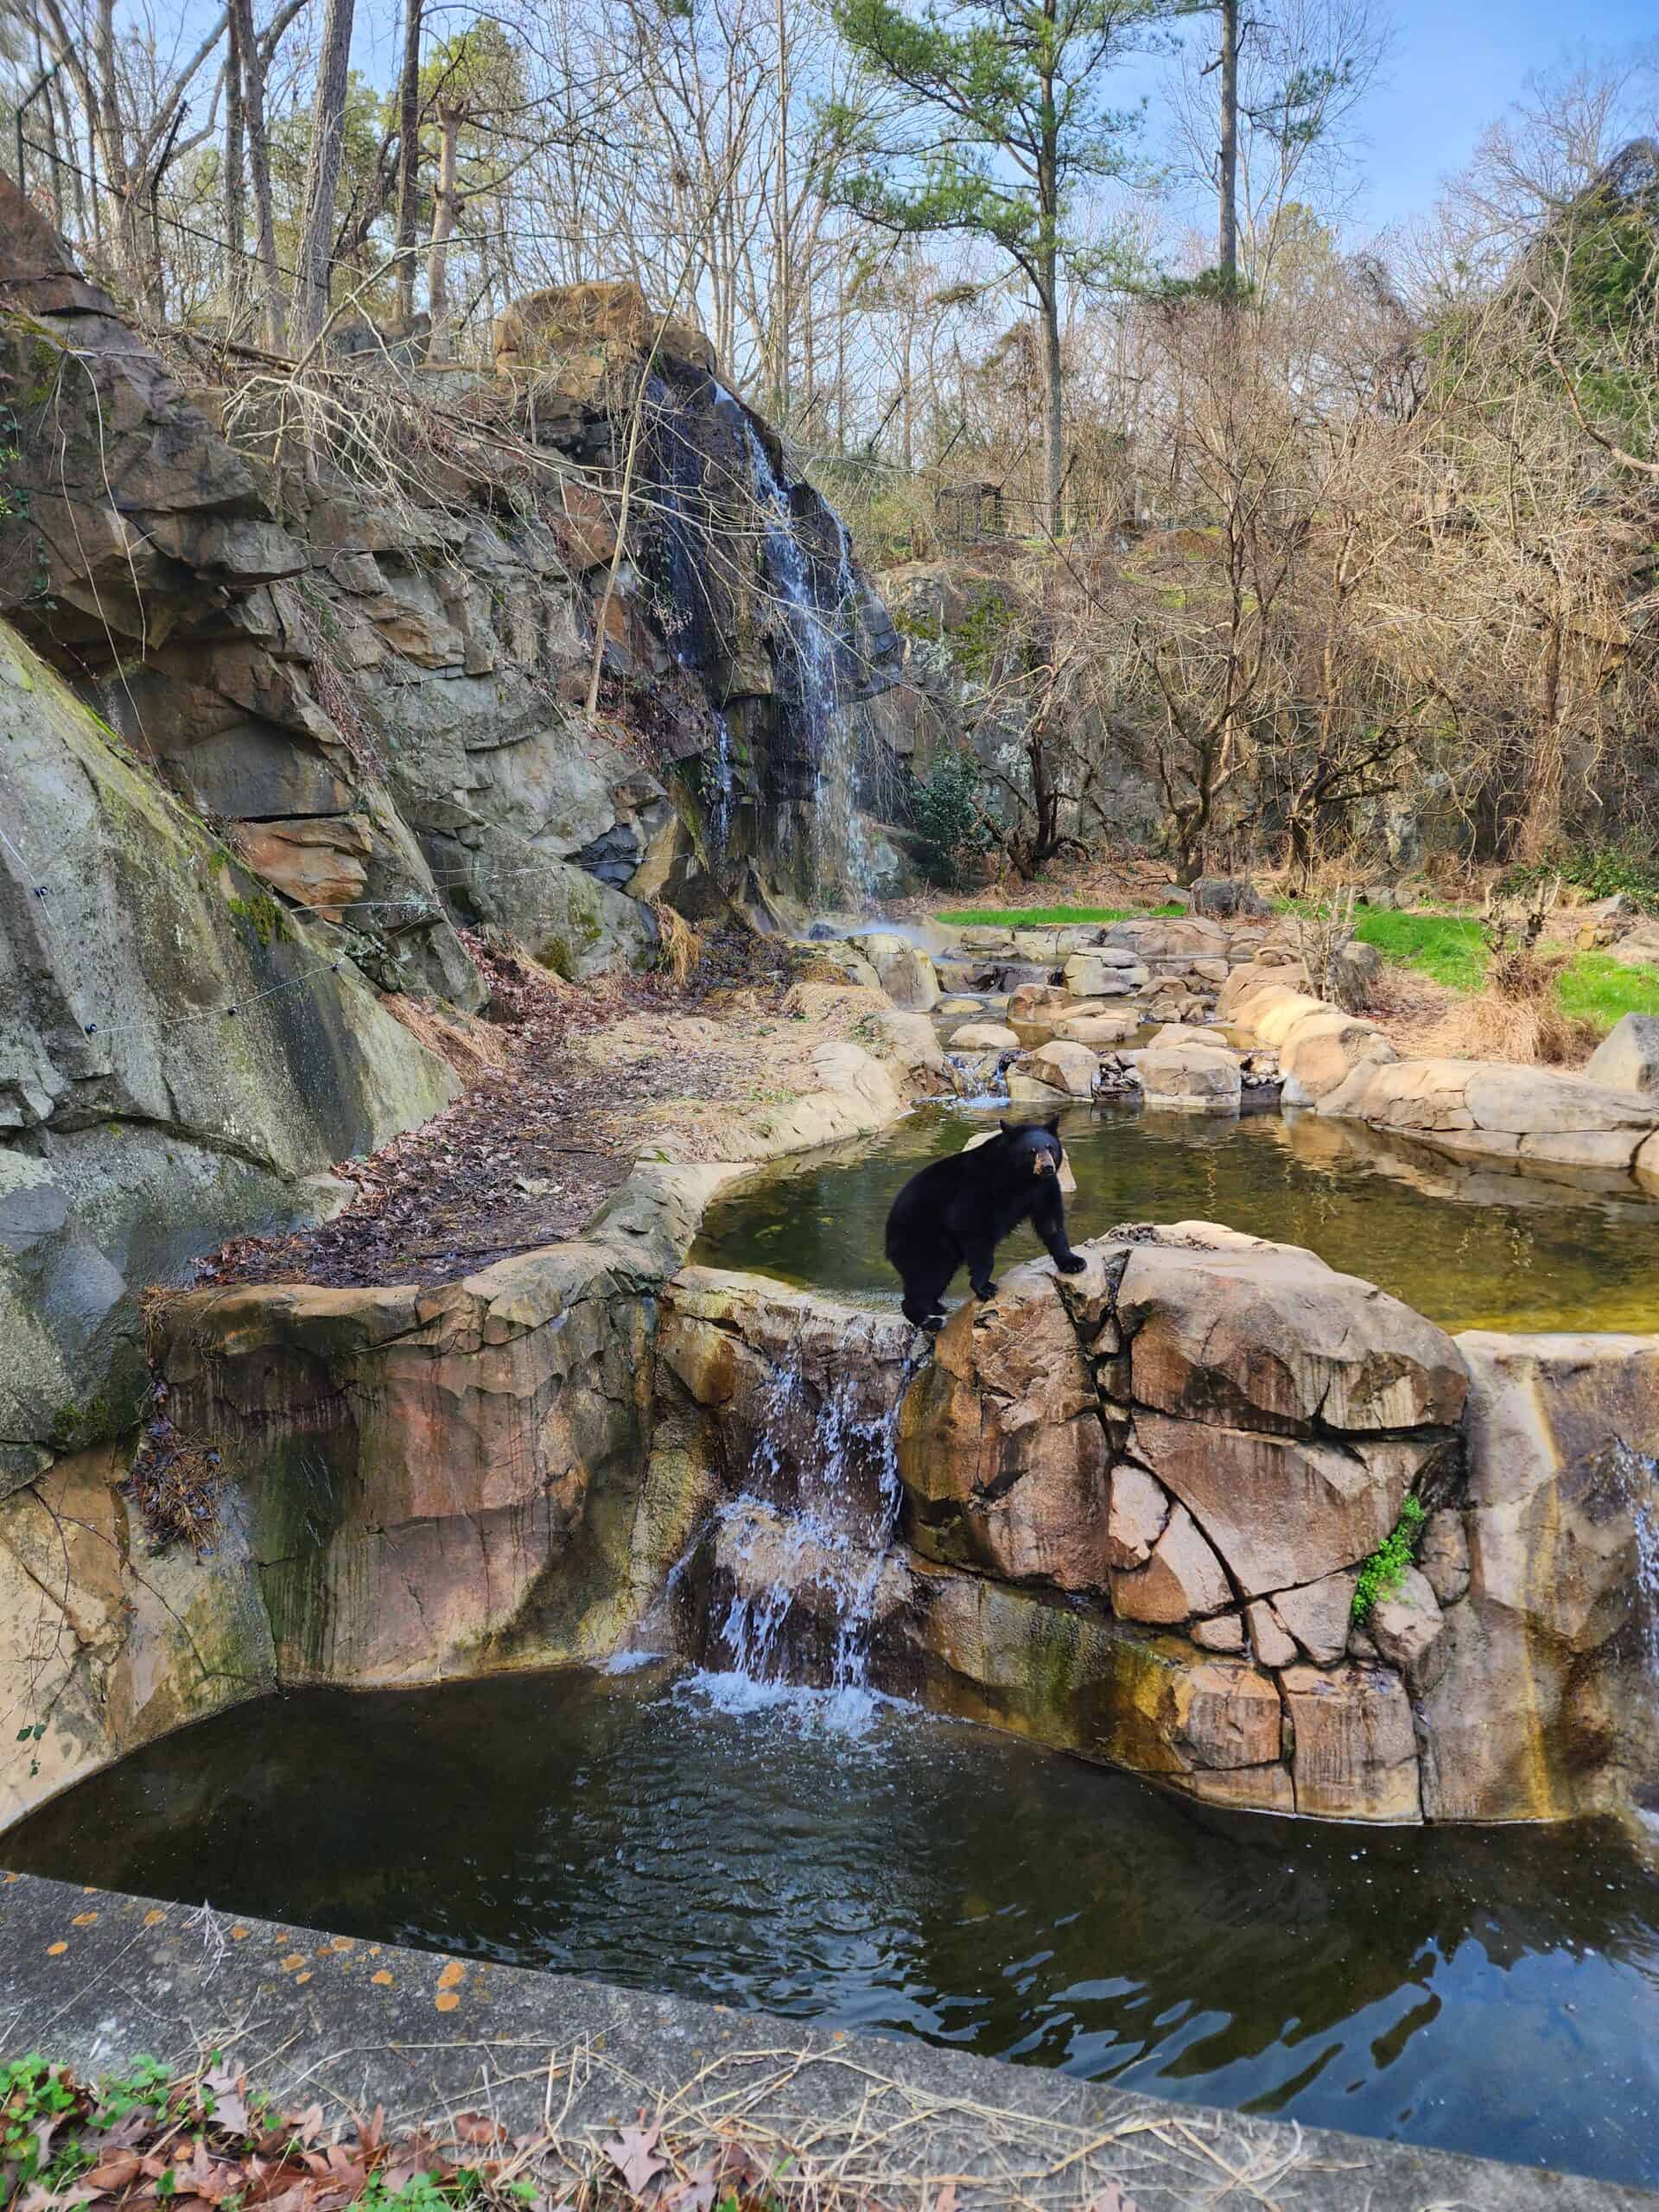 A solitary black bear explores a rocky outcrop beside a small waterfall within a naturalistic habitat, surrounded by the bare branches of trees and the tranquil sounds of flowing water.